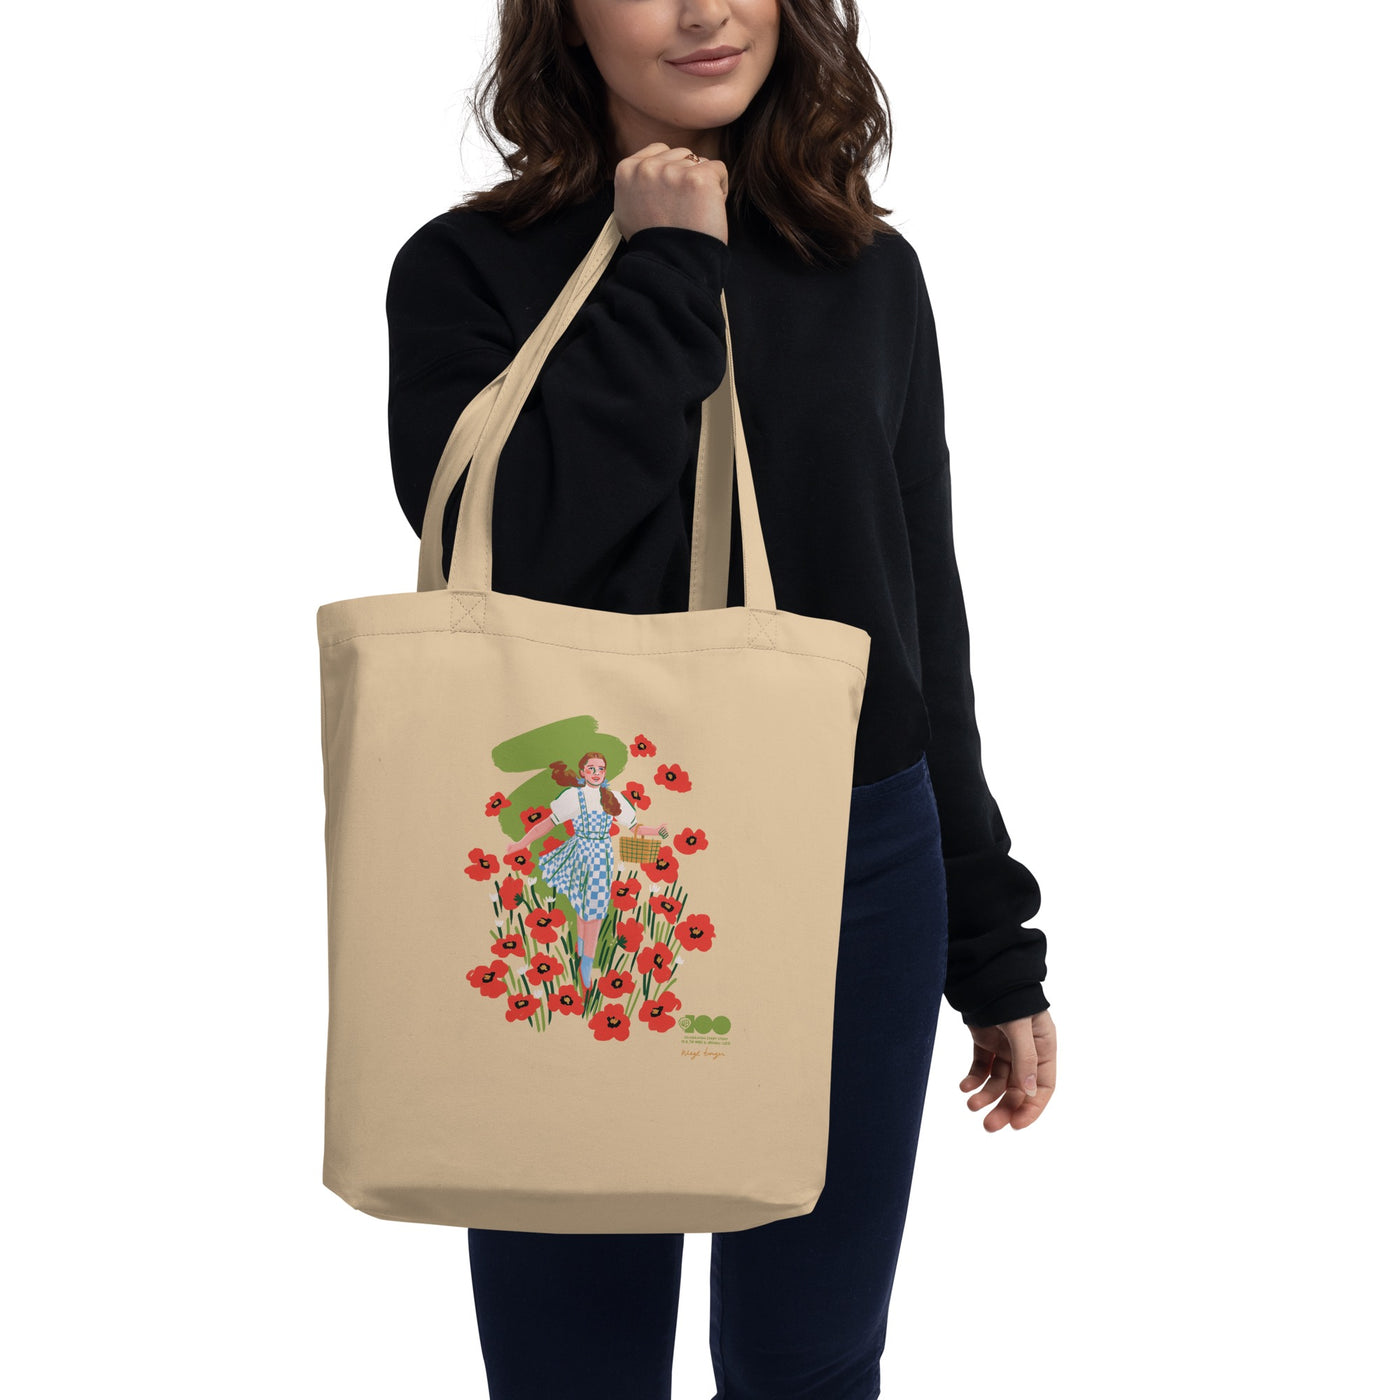 WB 100 Niege Borges Wizard of Oz Tote Bag